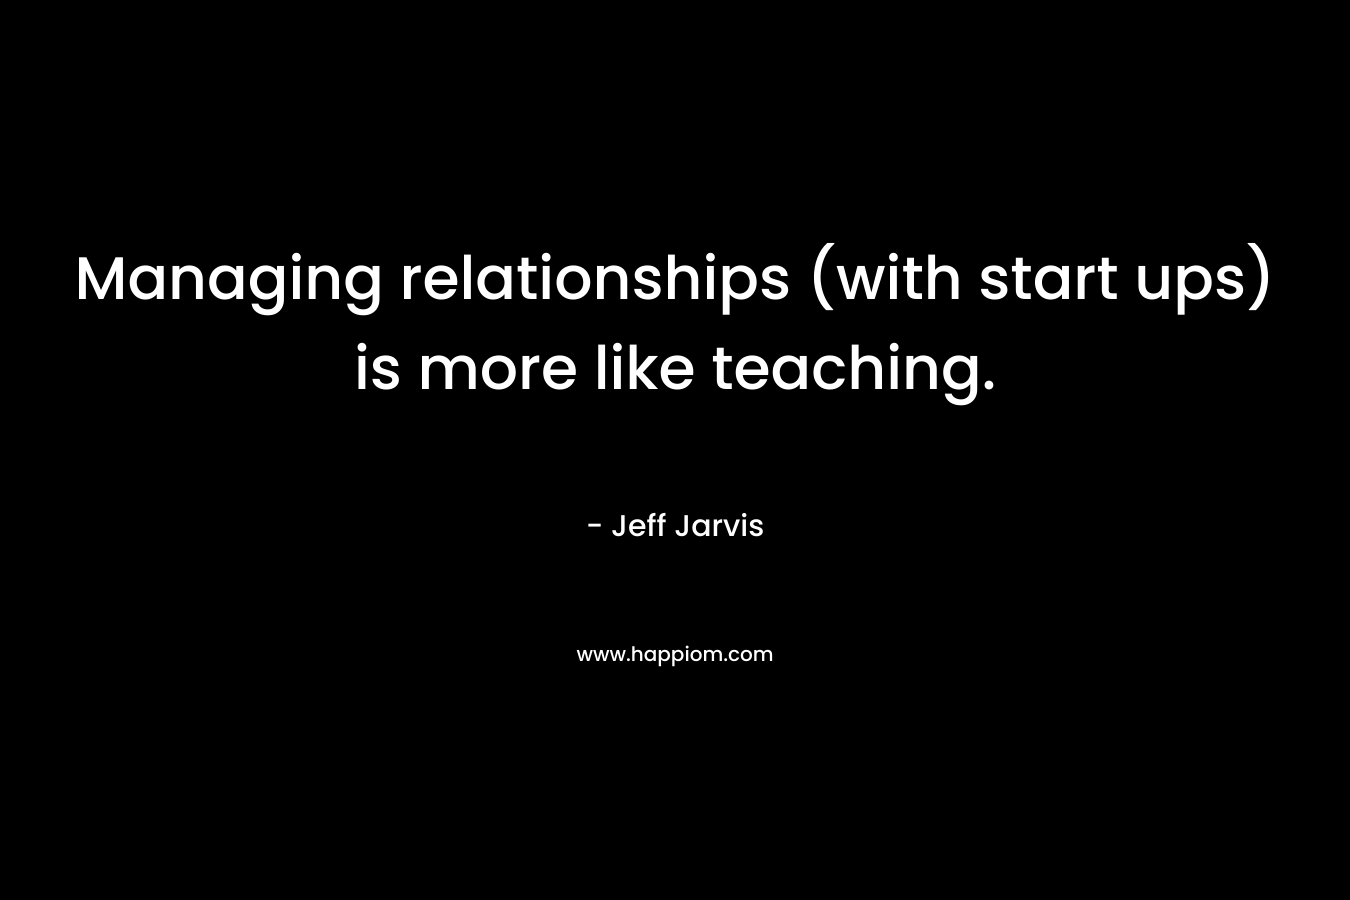 Managing relationships (with start ups) is more like teaching. – Jeff Jarvis